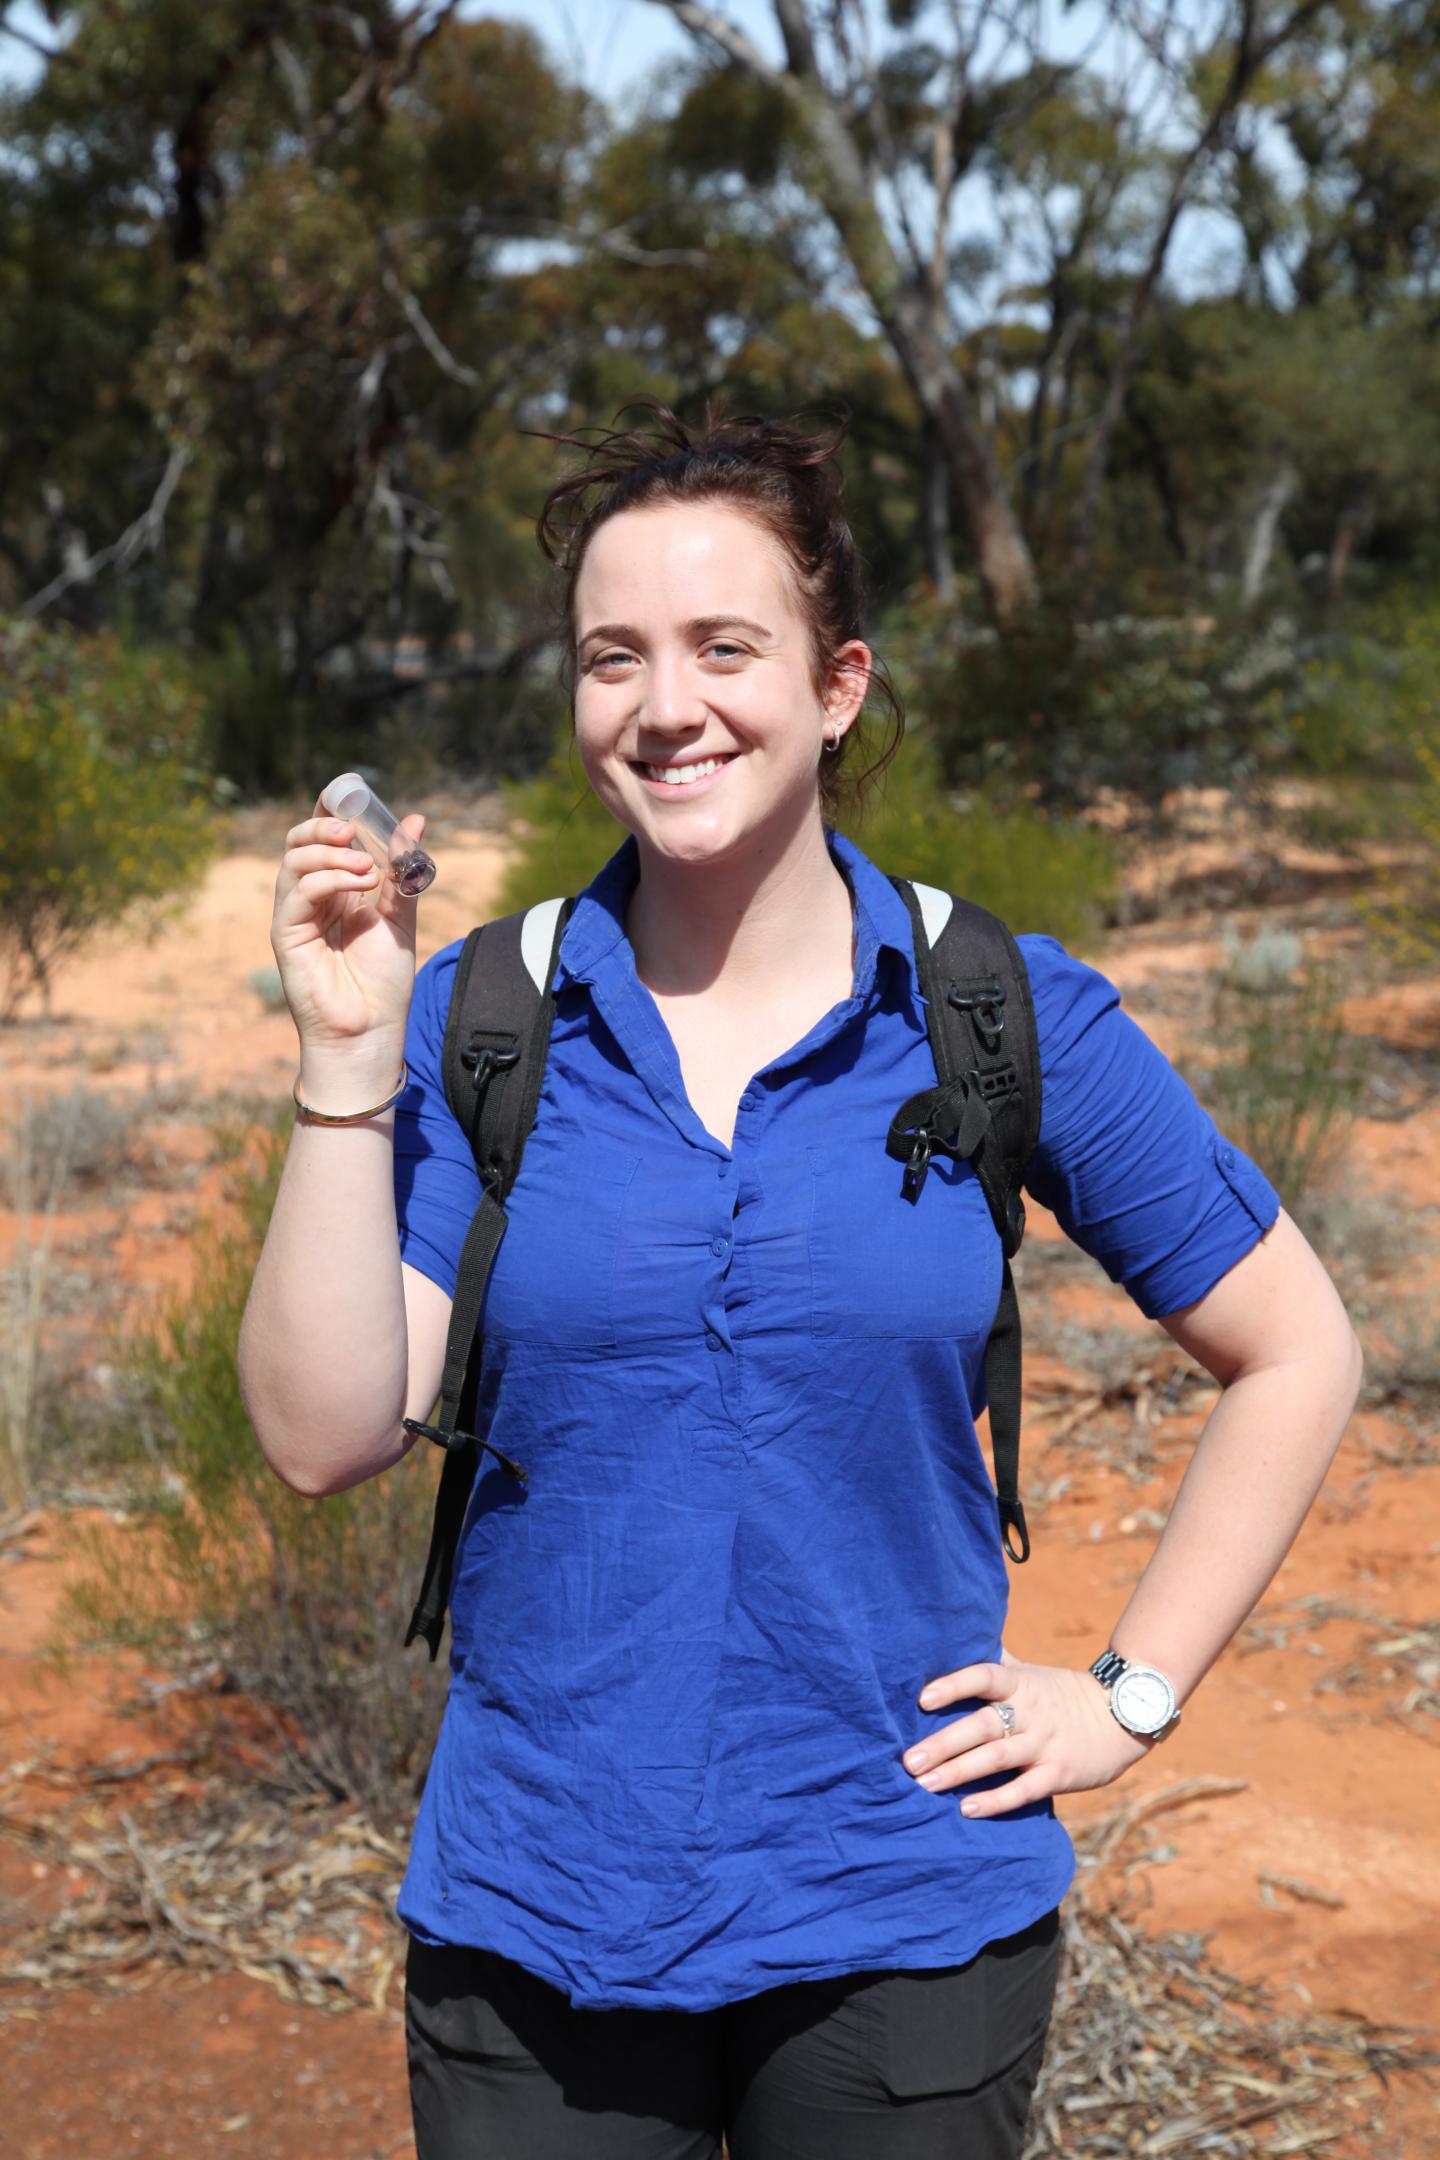 Ph.D. Candidate Sophie Harrison, University of Adelaide